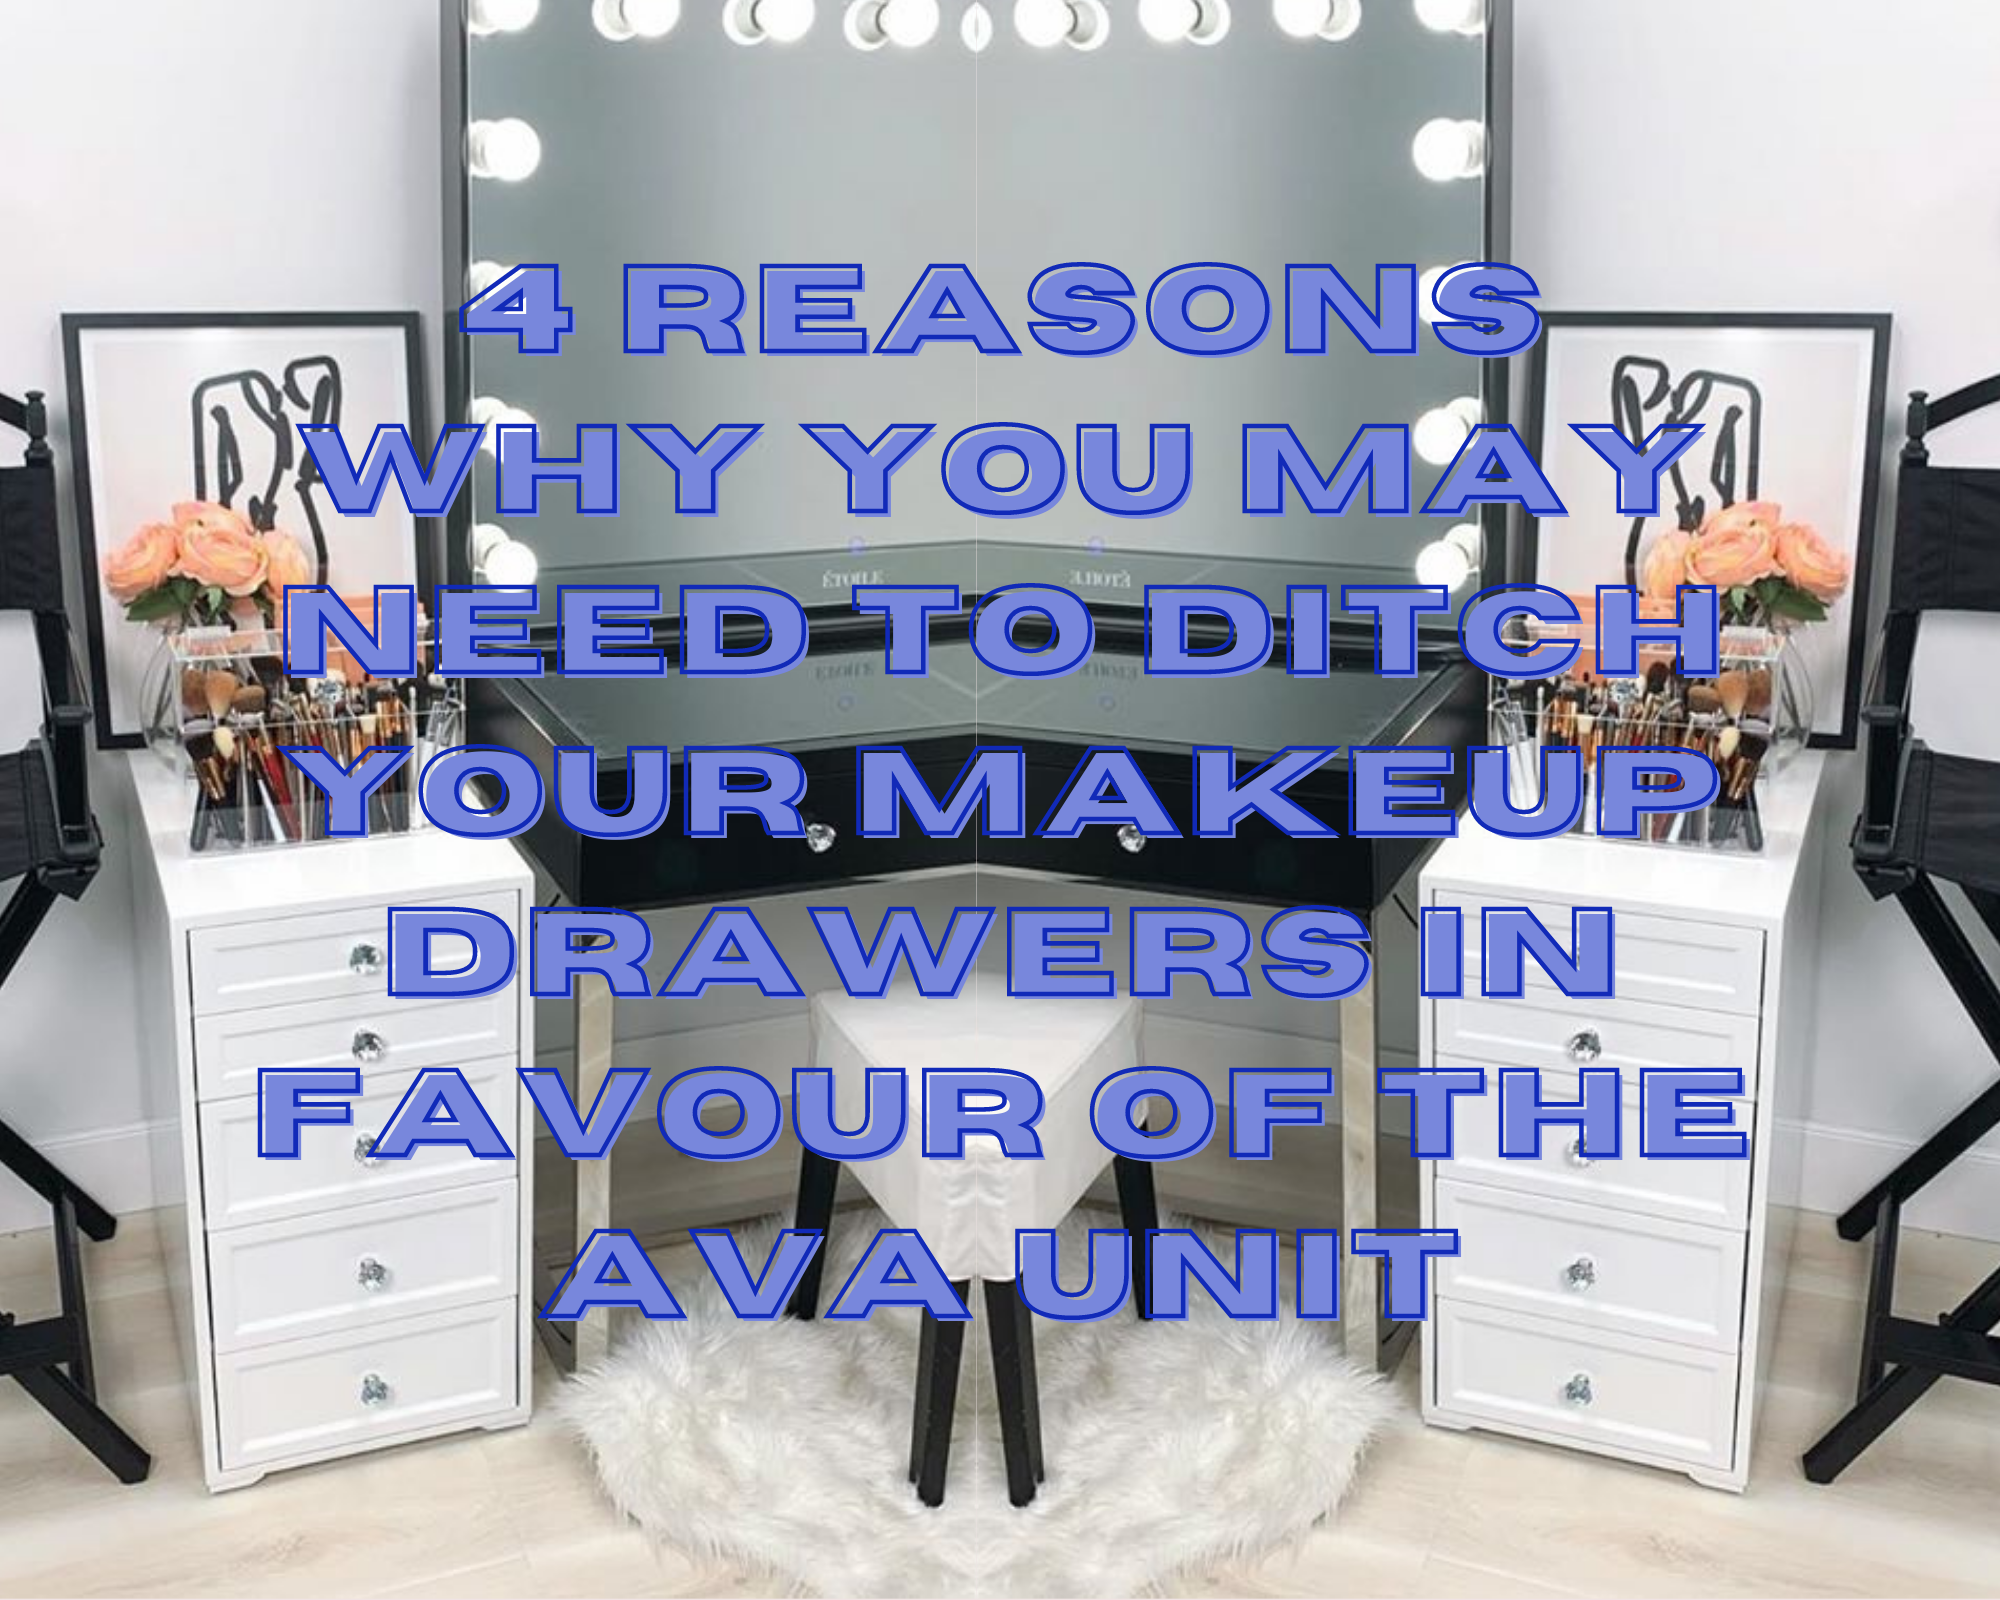 4 Reasons Why You May Need to Ditch your Makeup Drawers In Favour of The Ava Unit